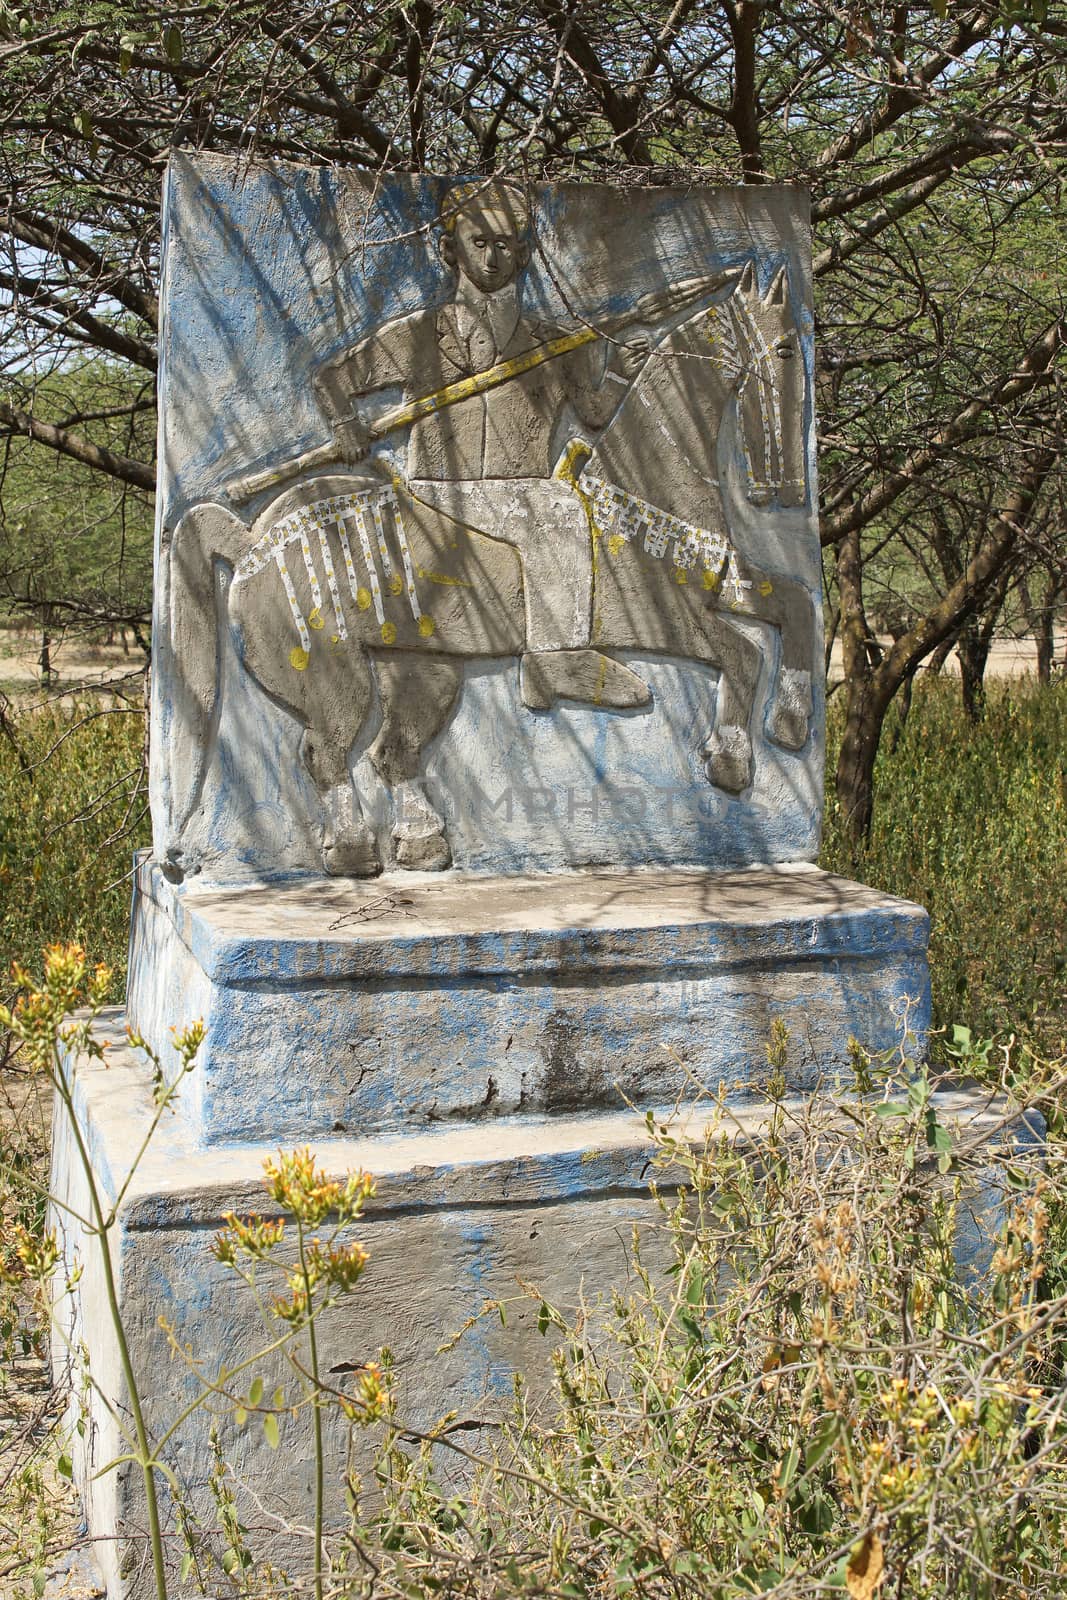 GREAT RIFT VALLEY, ETHIOPIA - NOVEMBER 15, 2014: Beautiful painted tombs of clan chiefs on November 15, 2014 in the Graet Rift Valley, Ethiopia, Africa